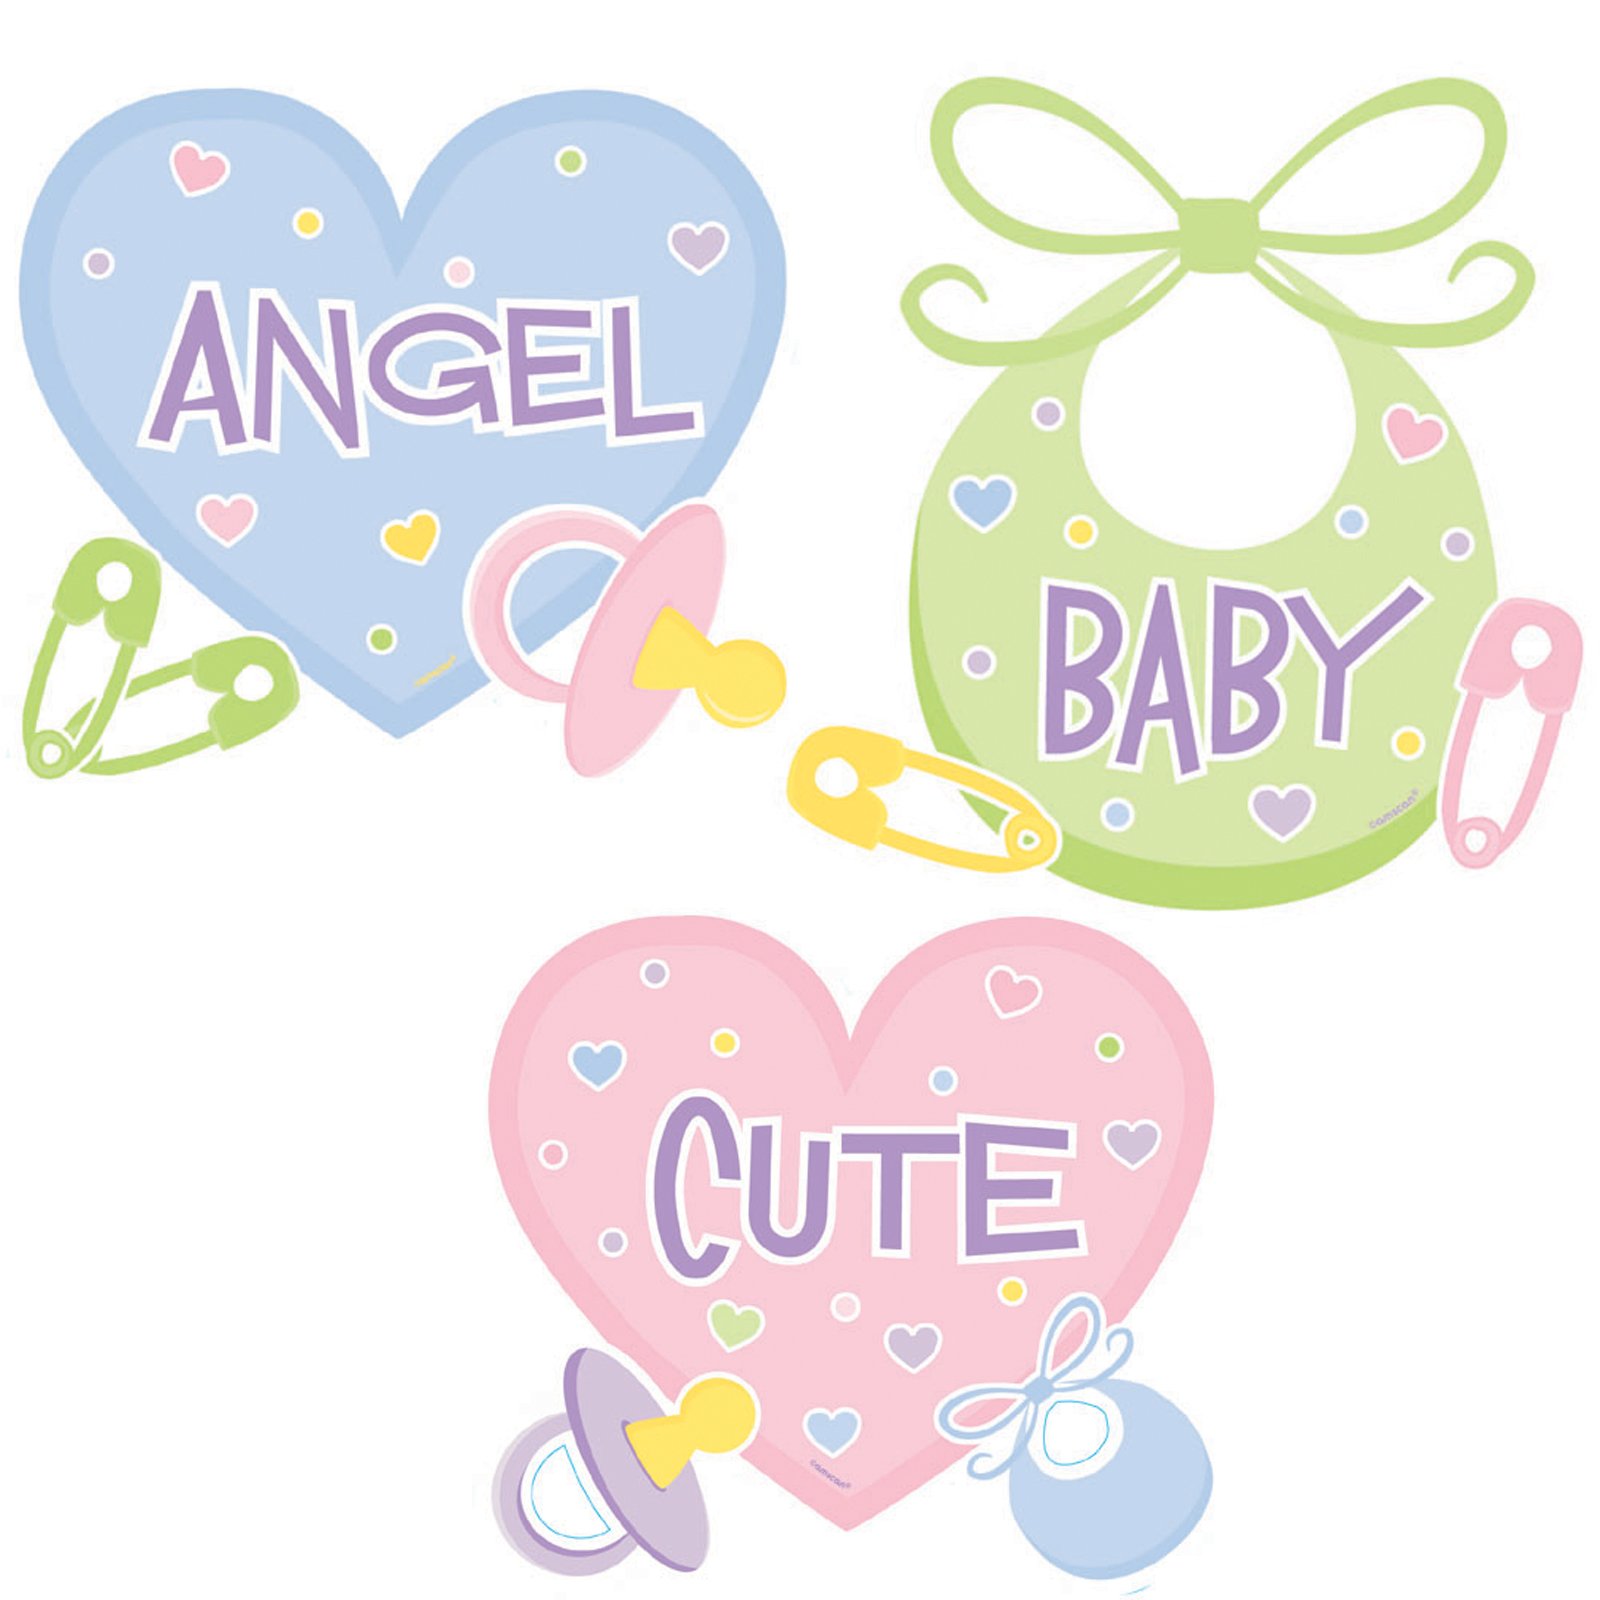 baby shower items clipart - photo #48